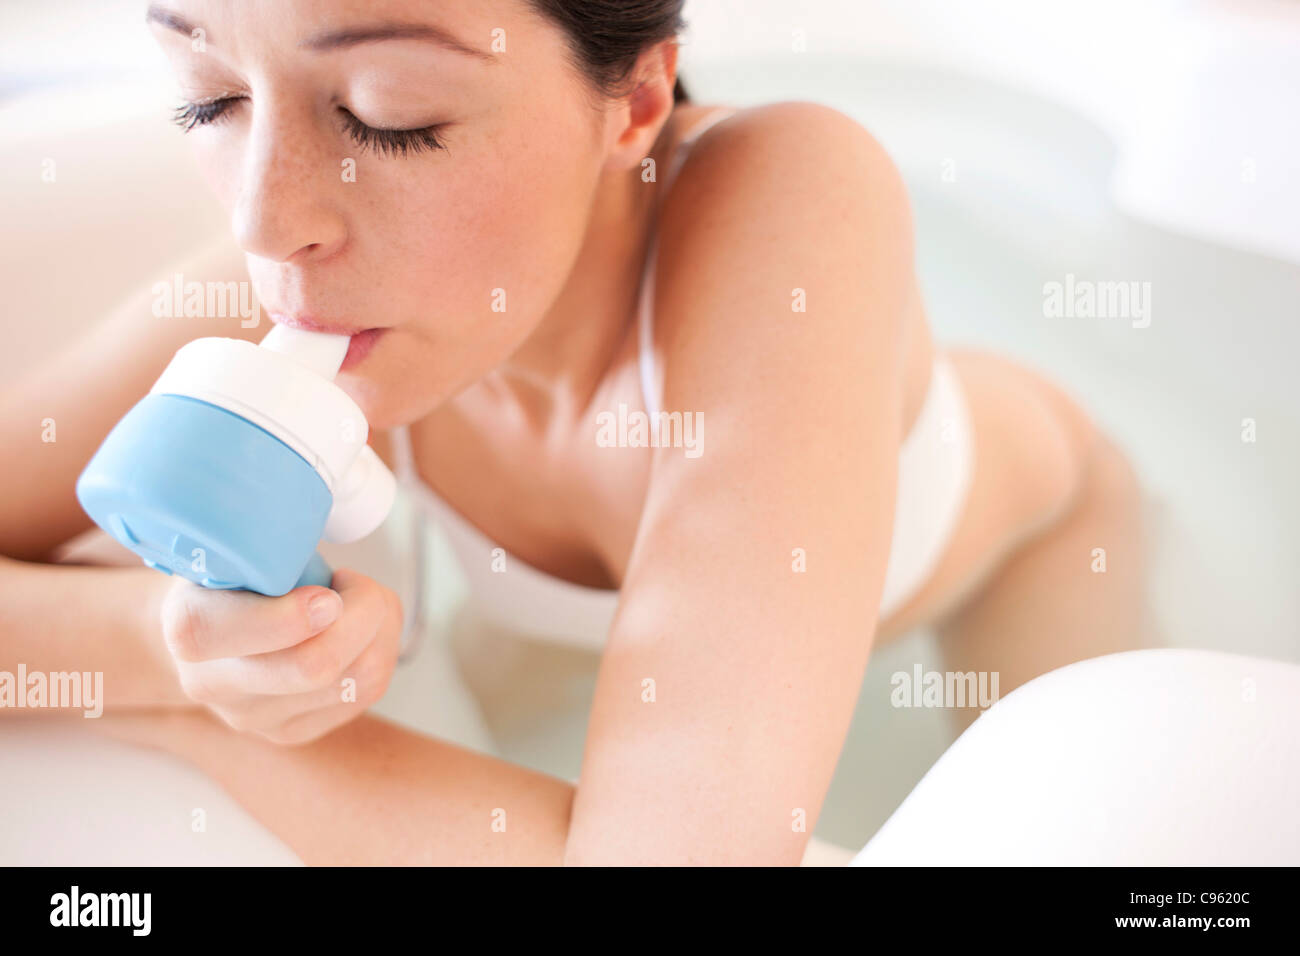 Water birth. Pregnant woman taking gas and air in a birthing pool. Stock Photo